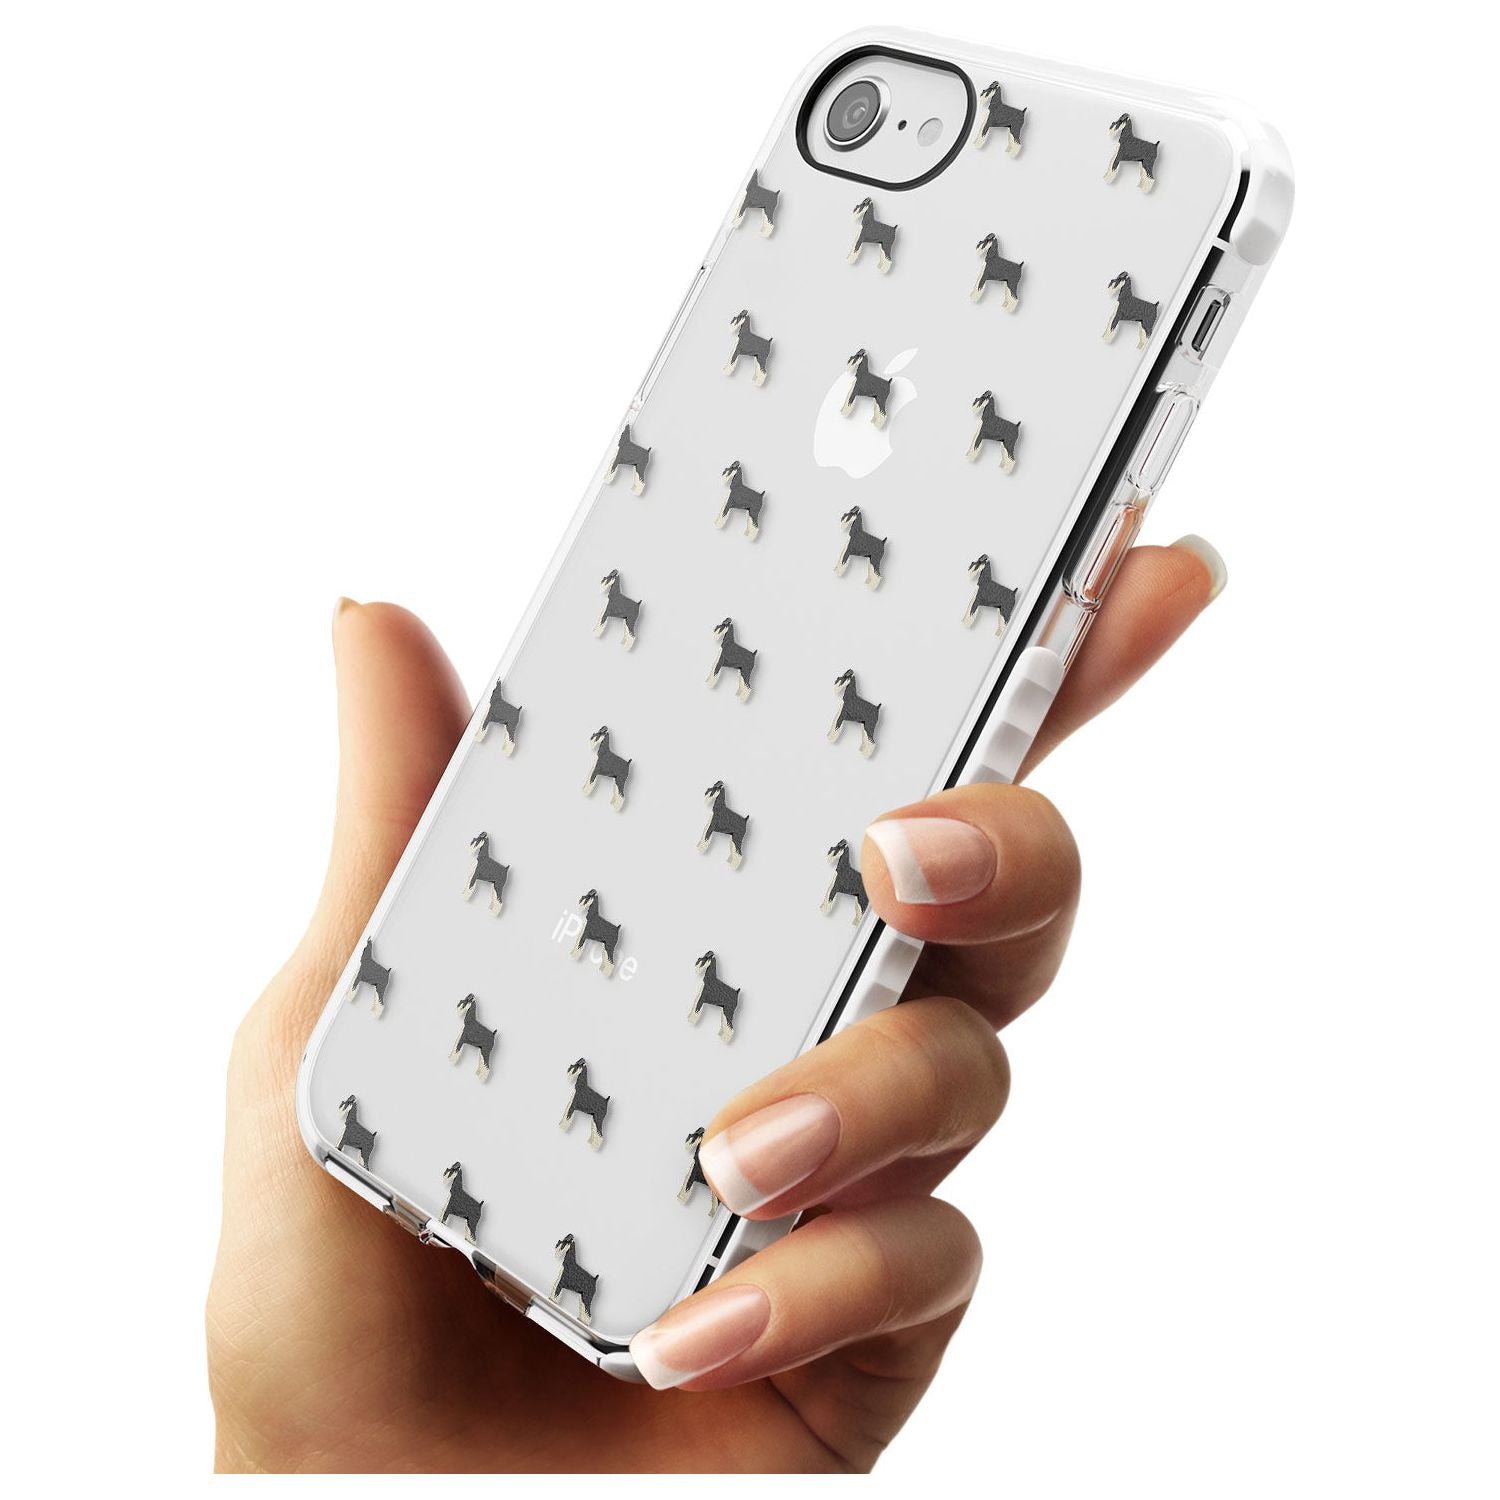 Schnauzer Dog Pattern Clear Impact Phone Case for iPhone SE 8 7 Plus